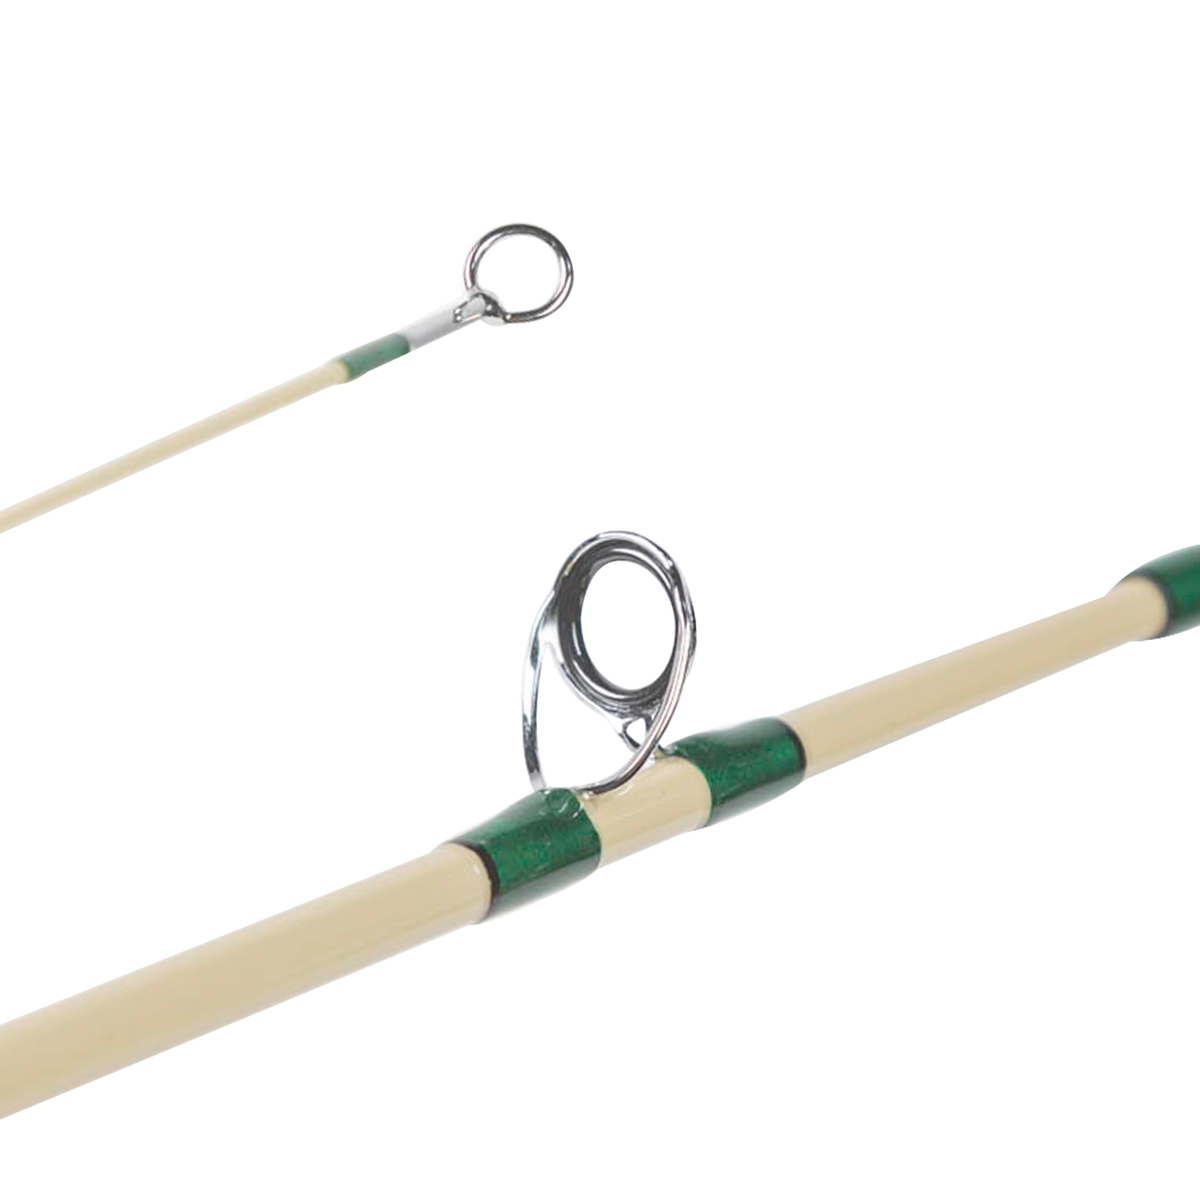 Maxxon Passage Outfit Fly Fishing Rod and Reel Combo - 8ft 4wt | Sportsman's Warehouse